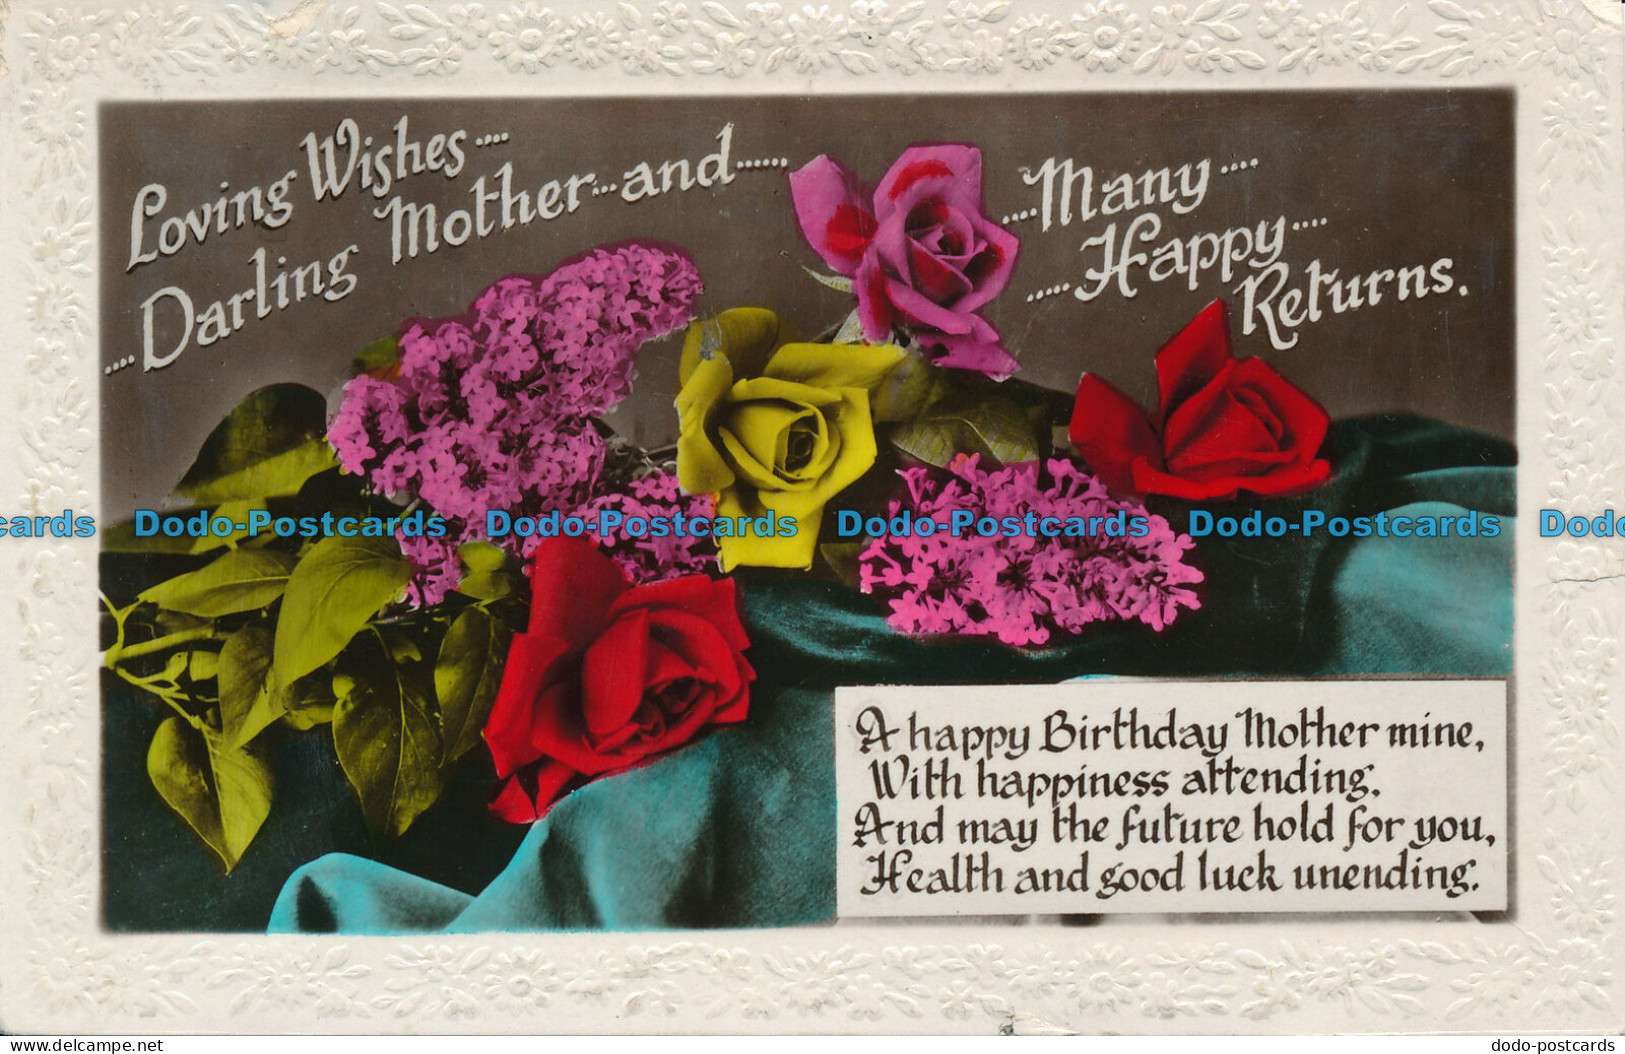 R104893 Greetings. Loving Wishes Darling Mother And Many Happy Returns. Flowers. - Mundo